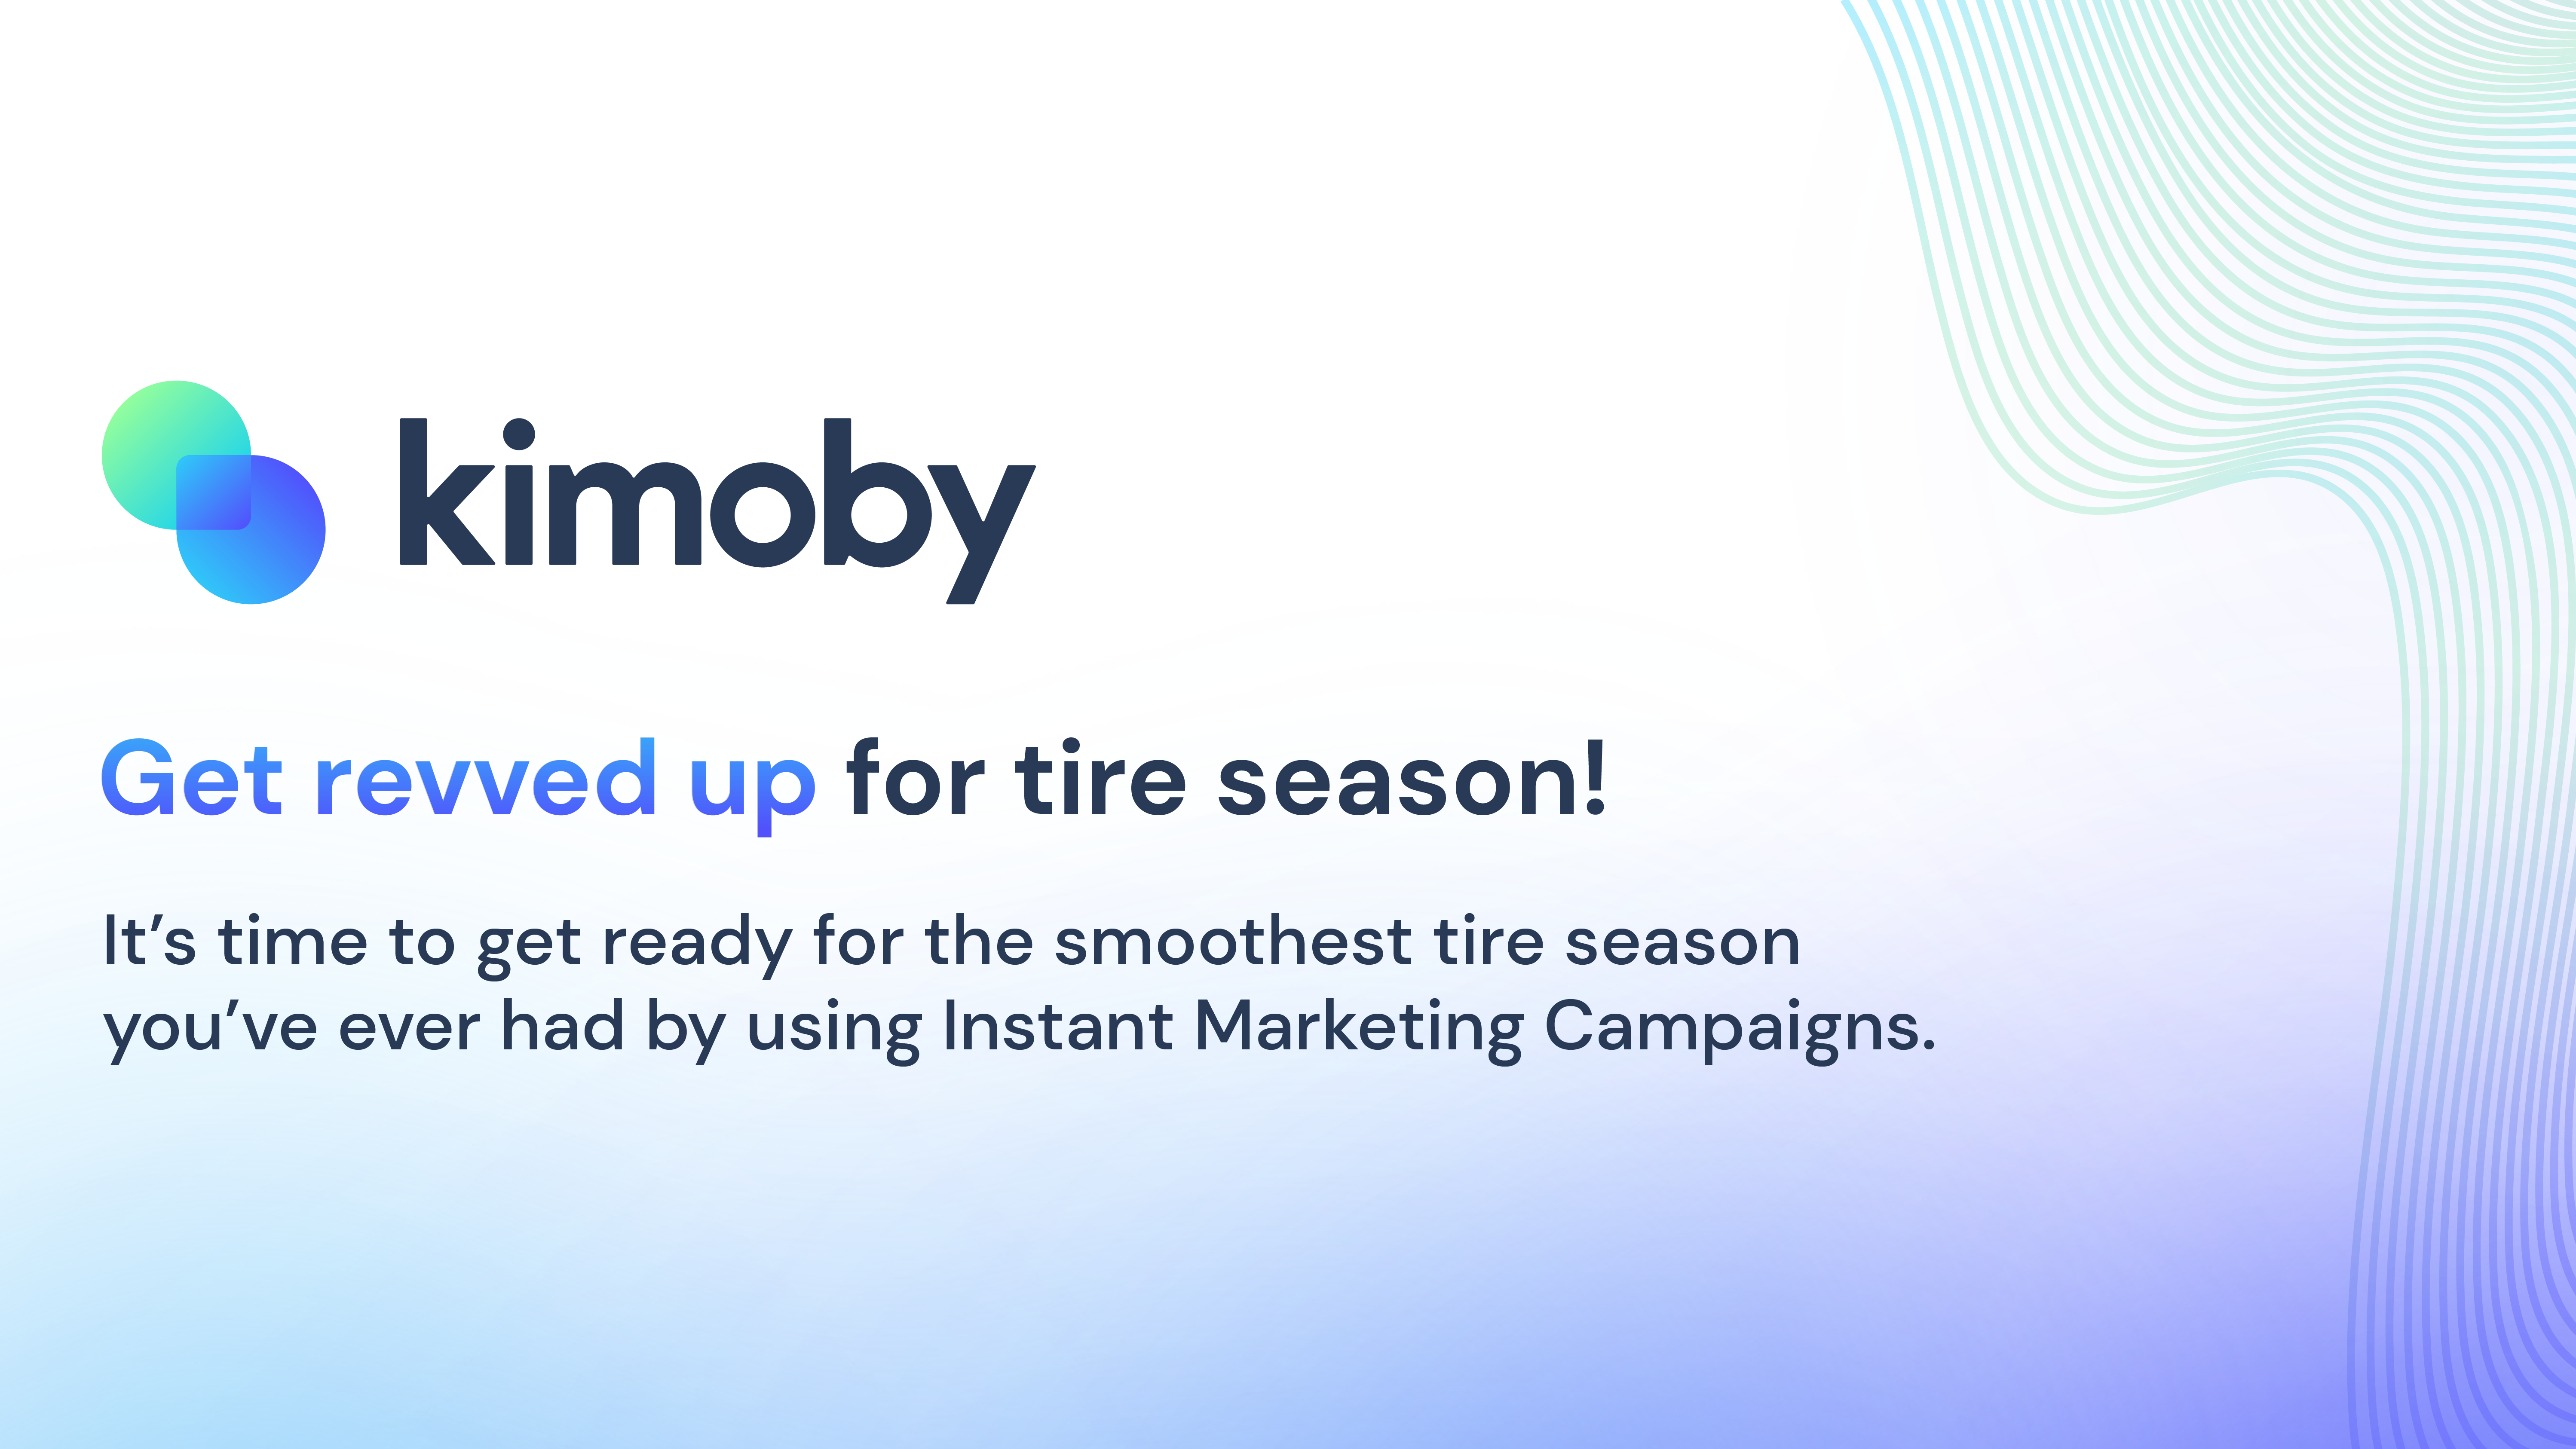 Make This Tire Swapping Season the Best Yet